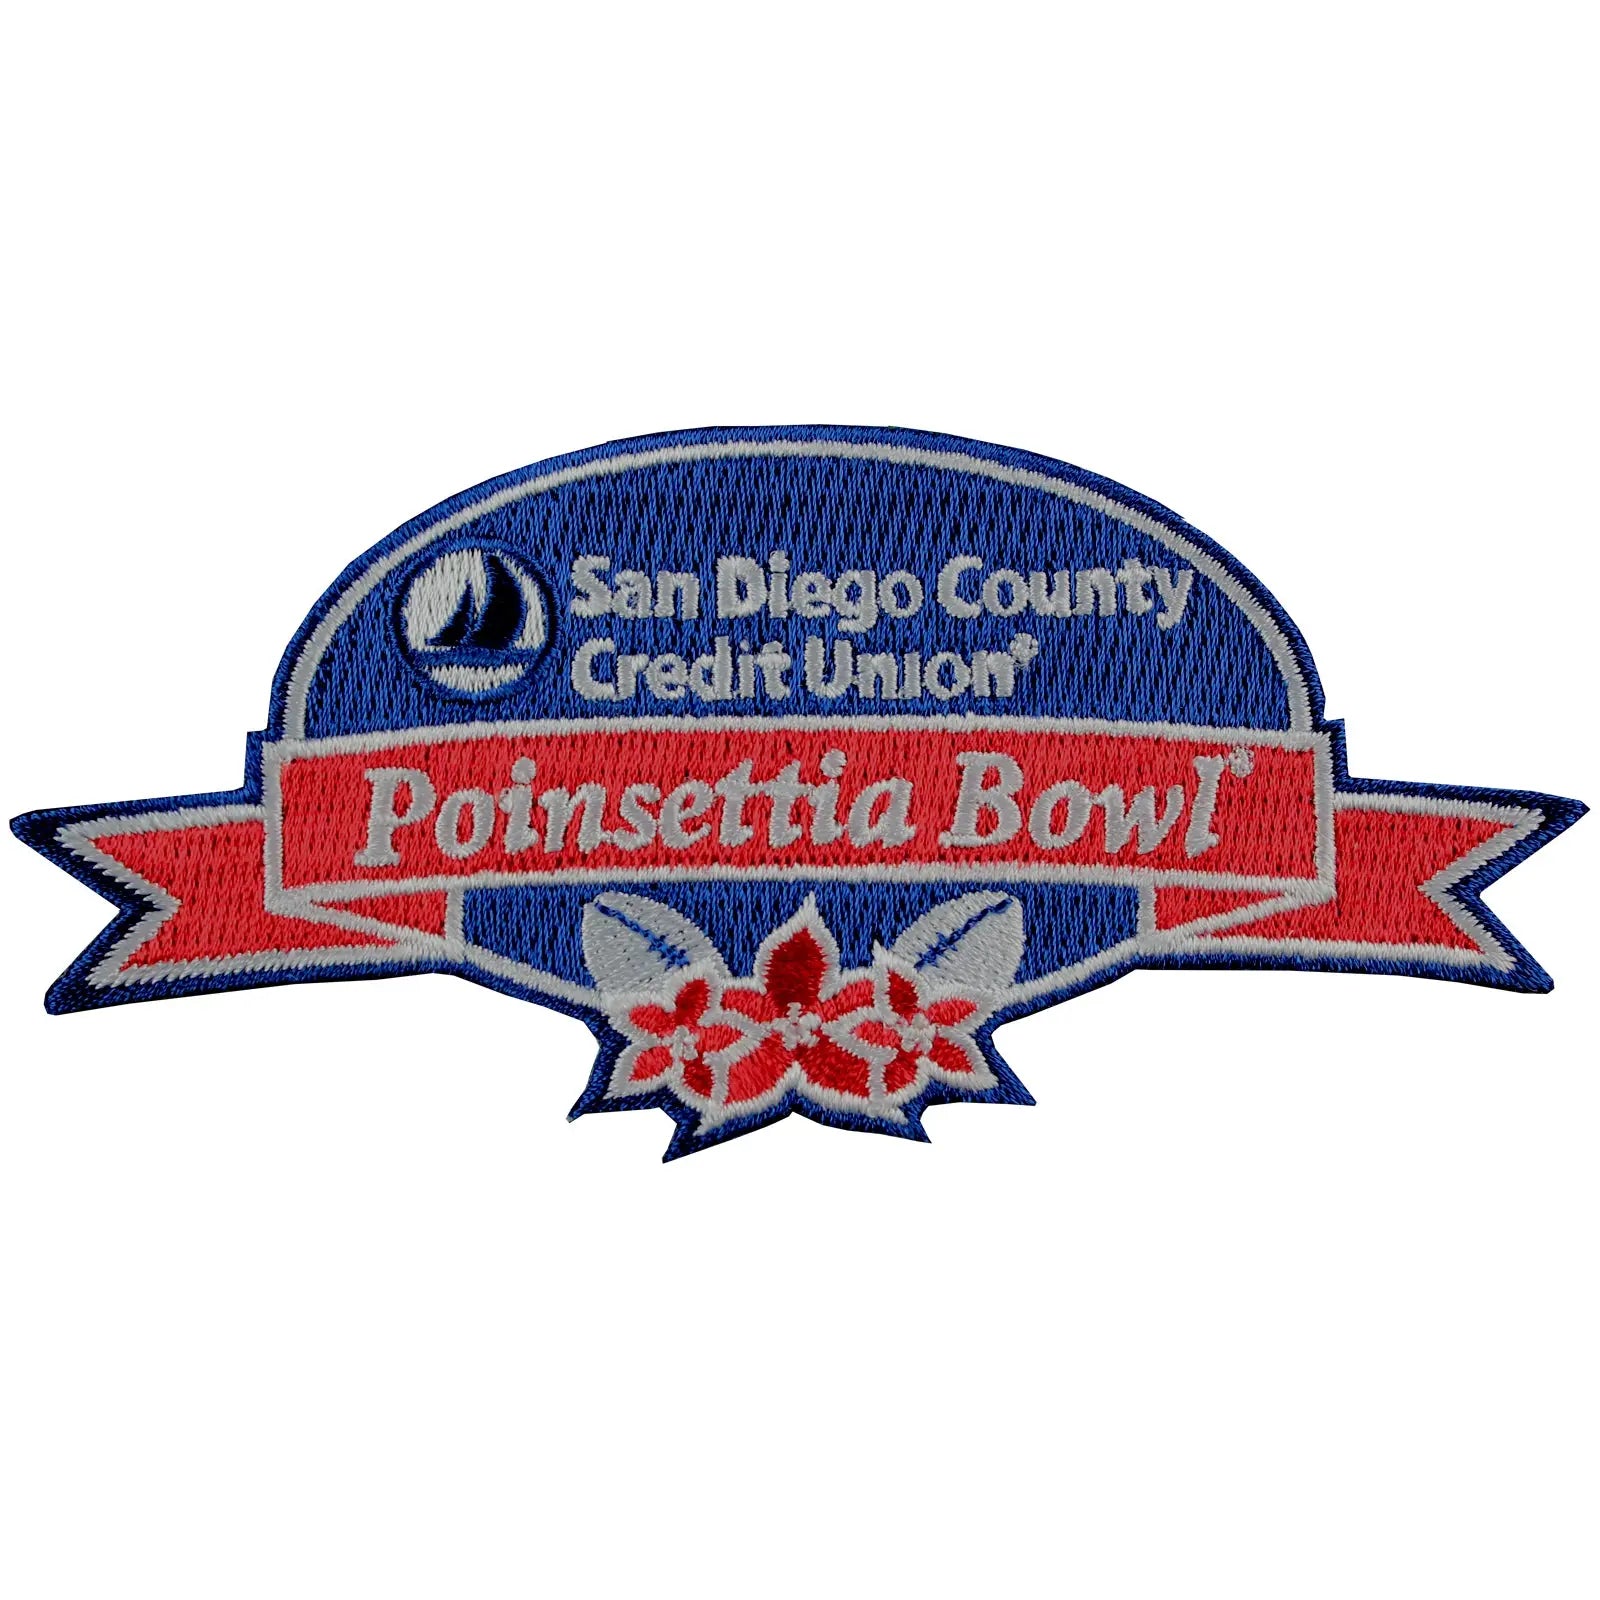 San Diego County Credit Union Poinsettia Game Jersey Patch Boise State vs. Northern Illionois (2015) 